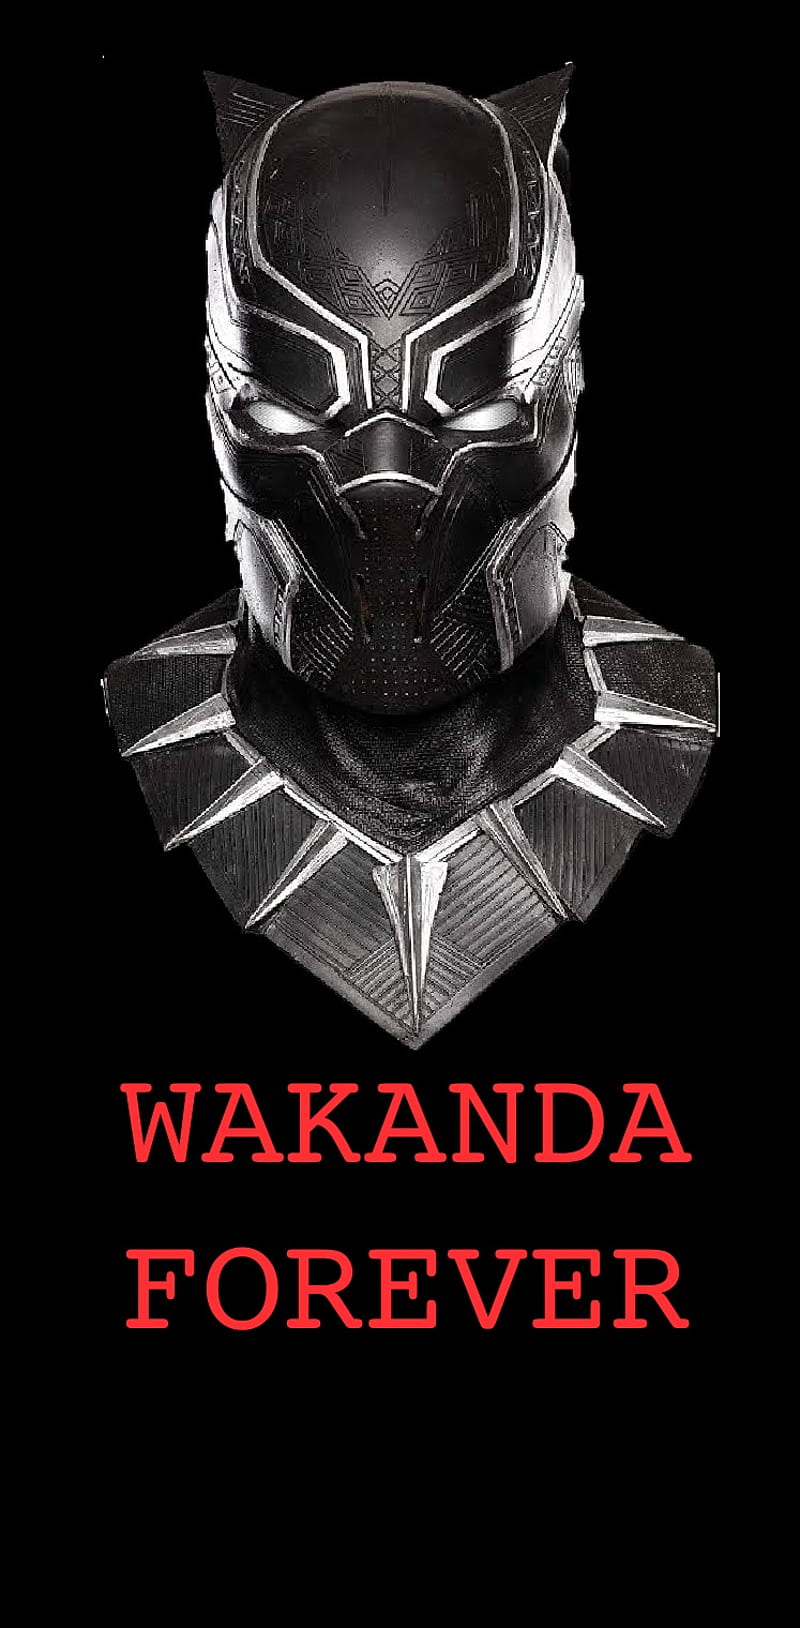 Black Panther: Wakanda Forever review – The Dispatch